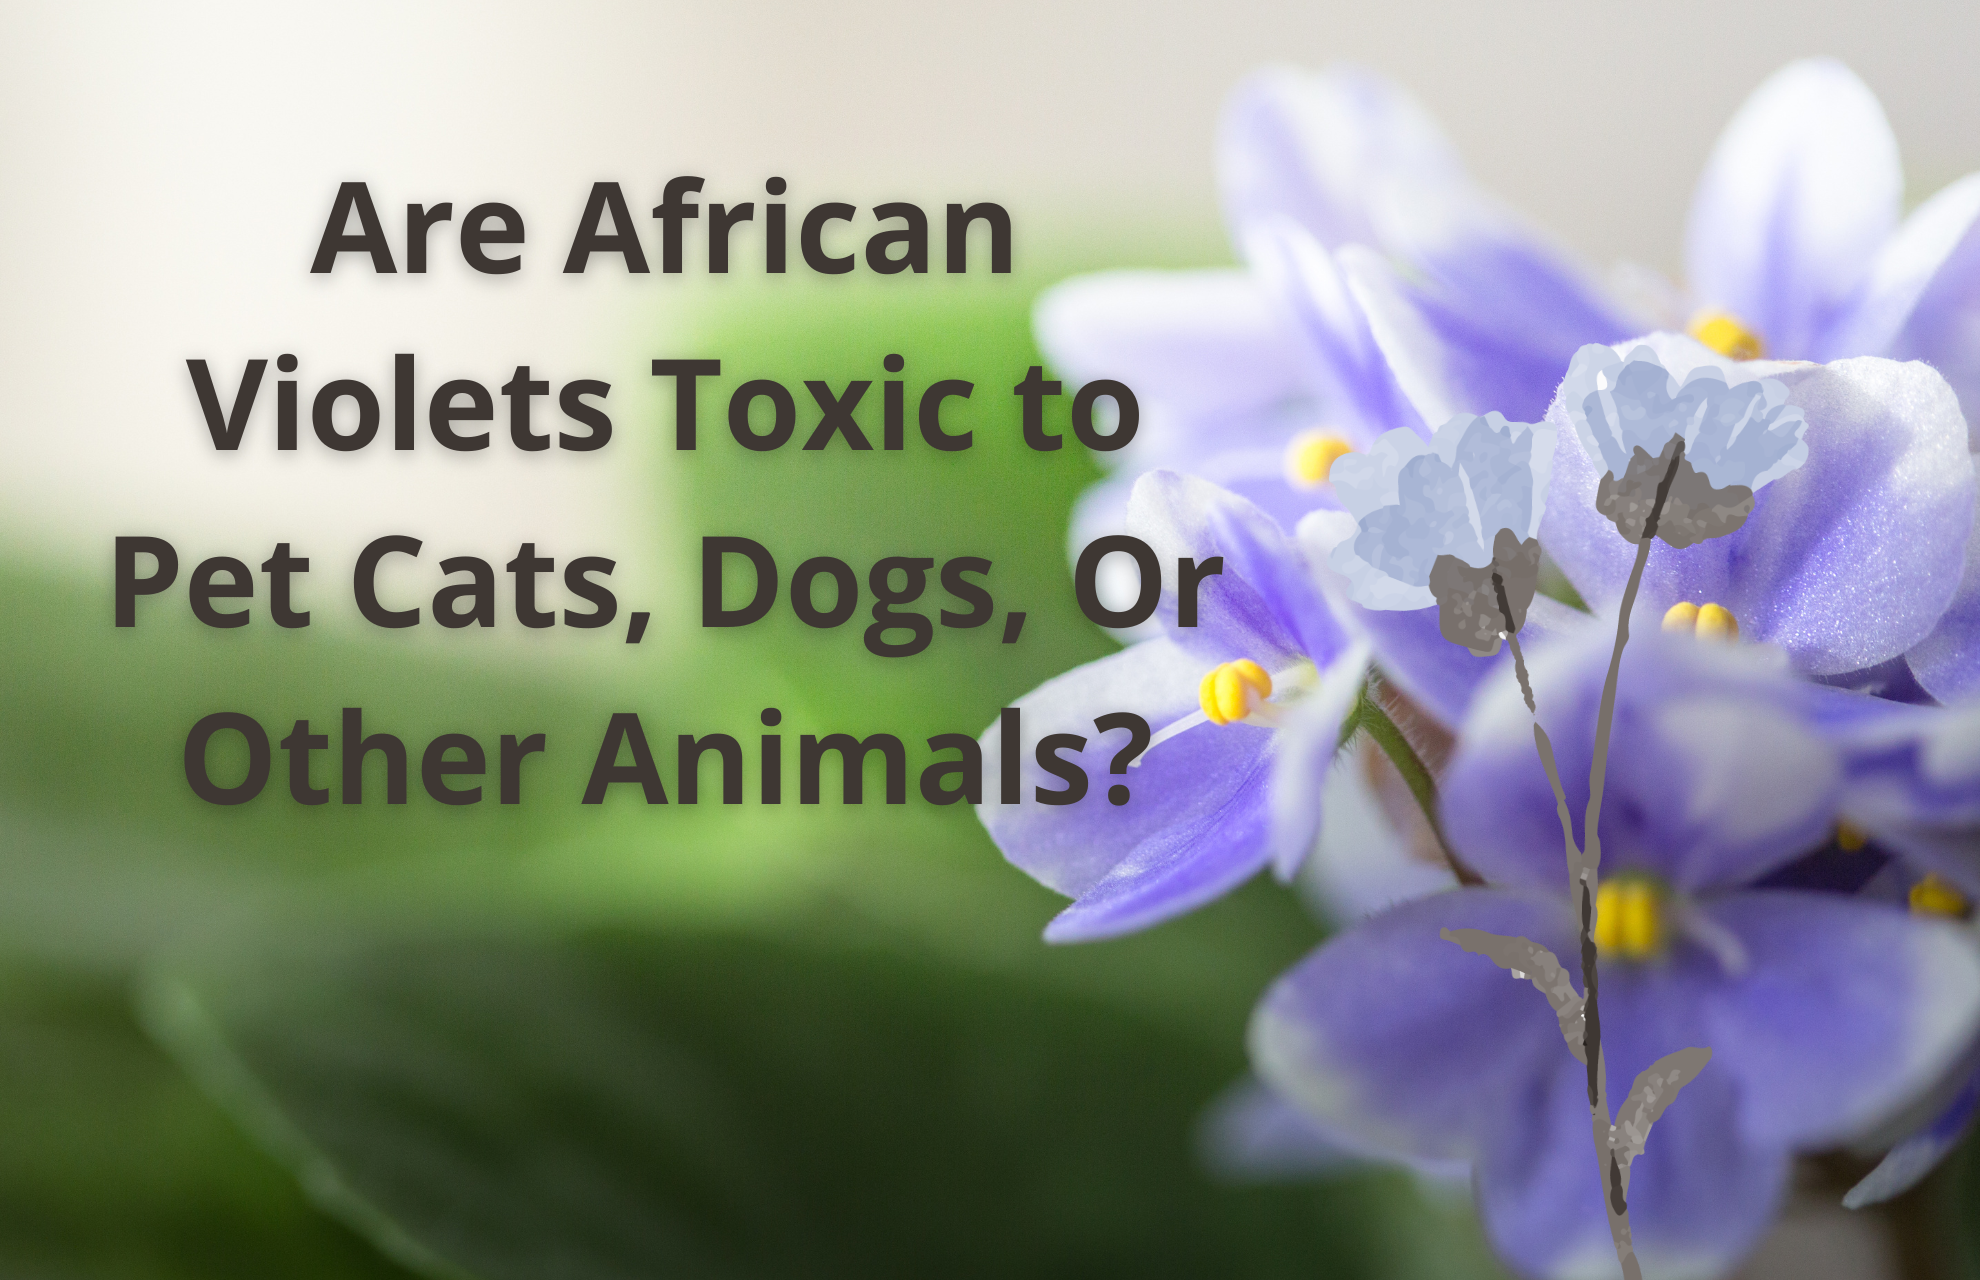 Are African Violets Toxic to Pet Cats, Dogs, Or Other Animals?